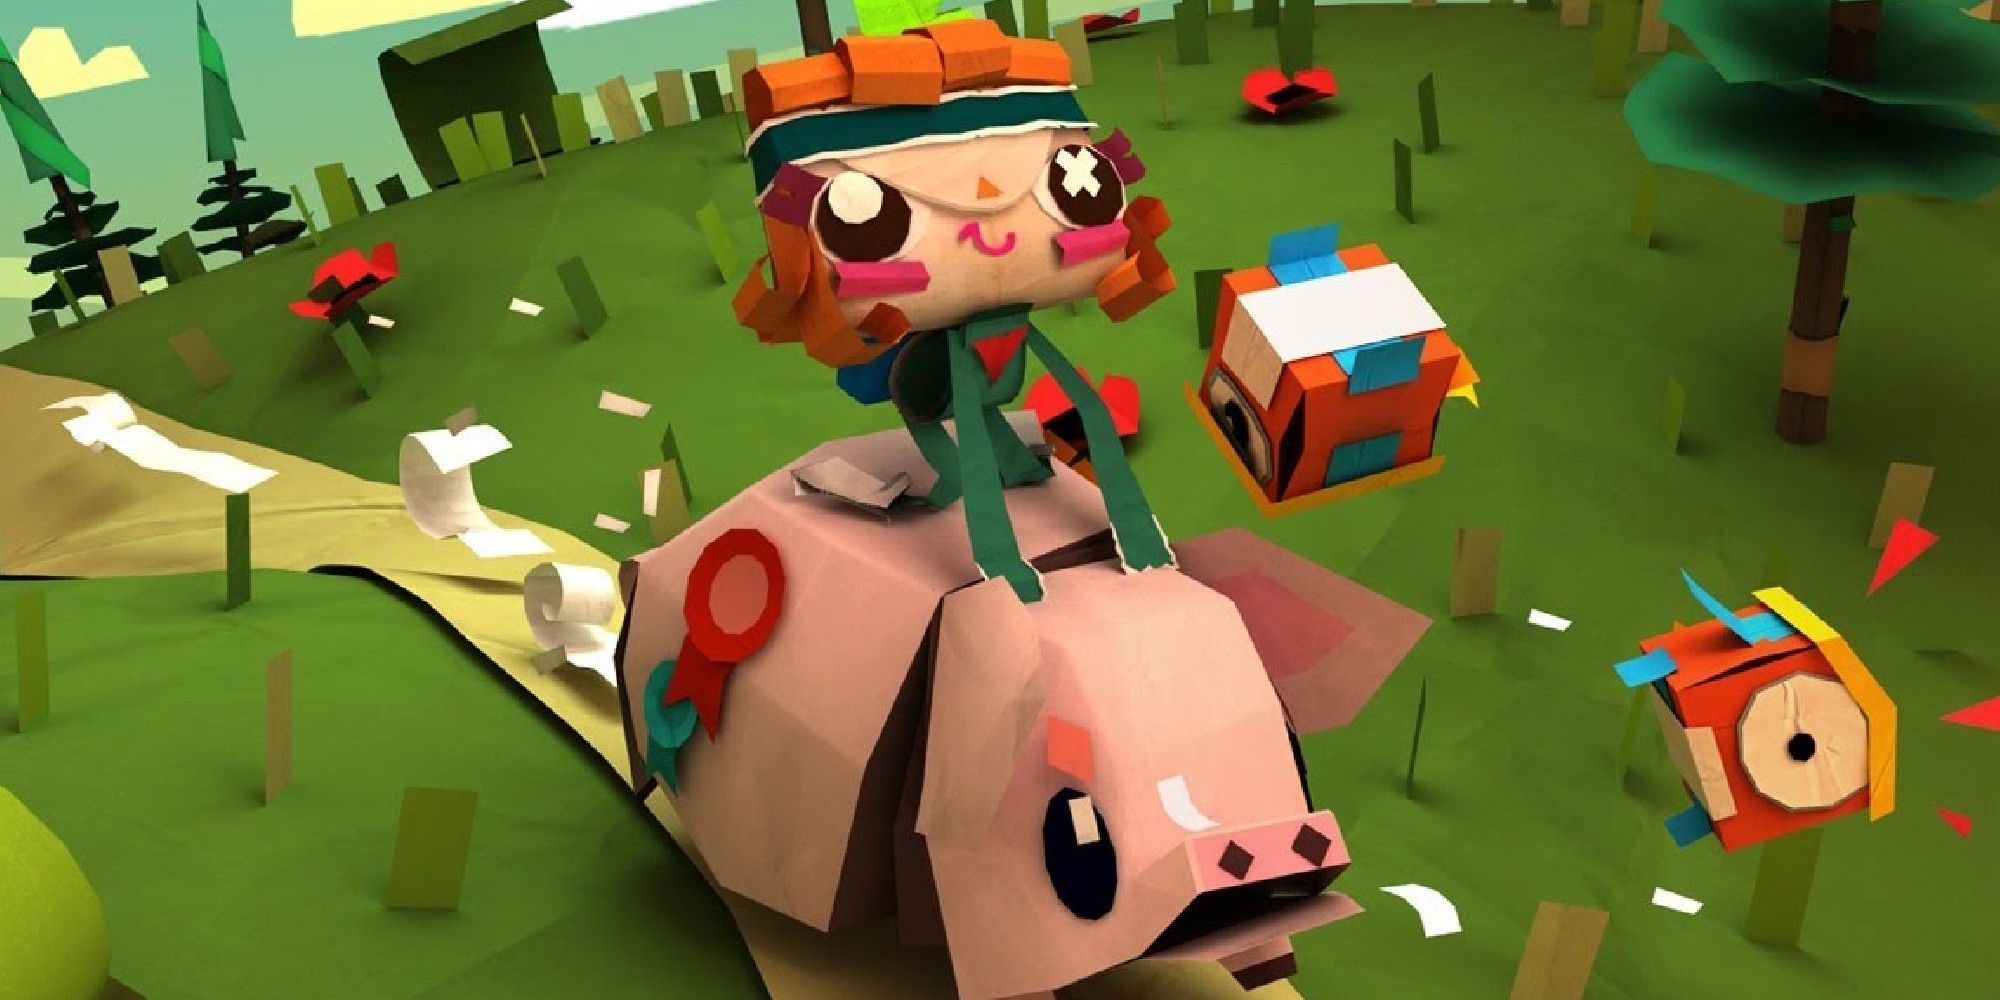 Tearaway Unfolded - Atoi Riding A Pig Down A Grassy Path